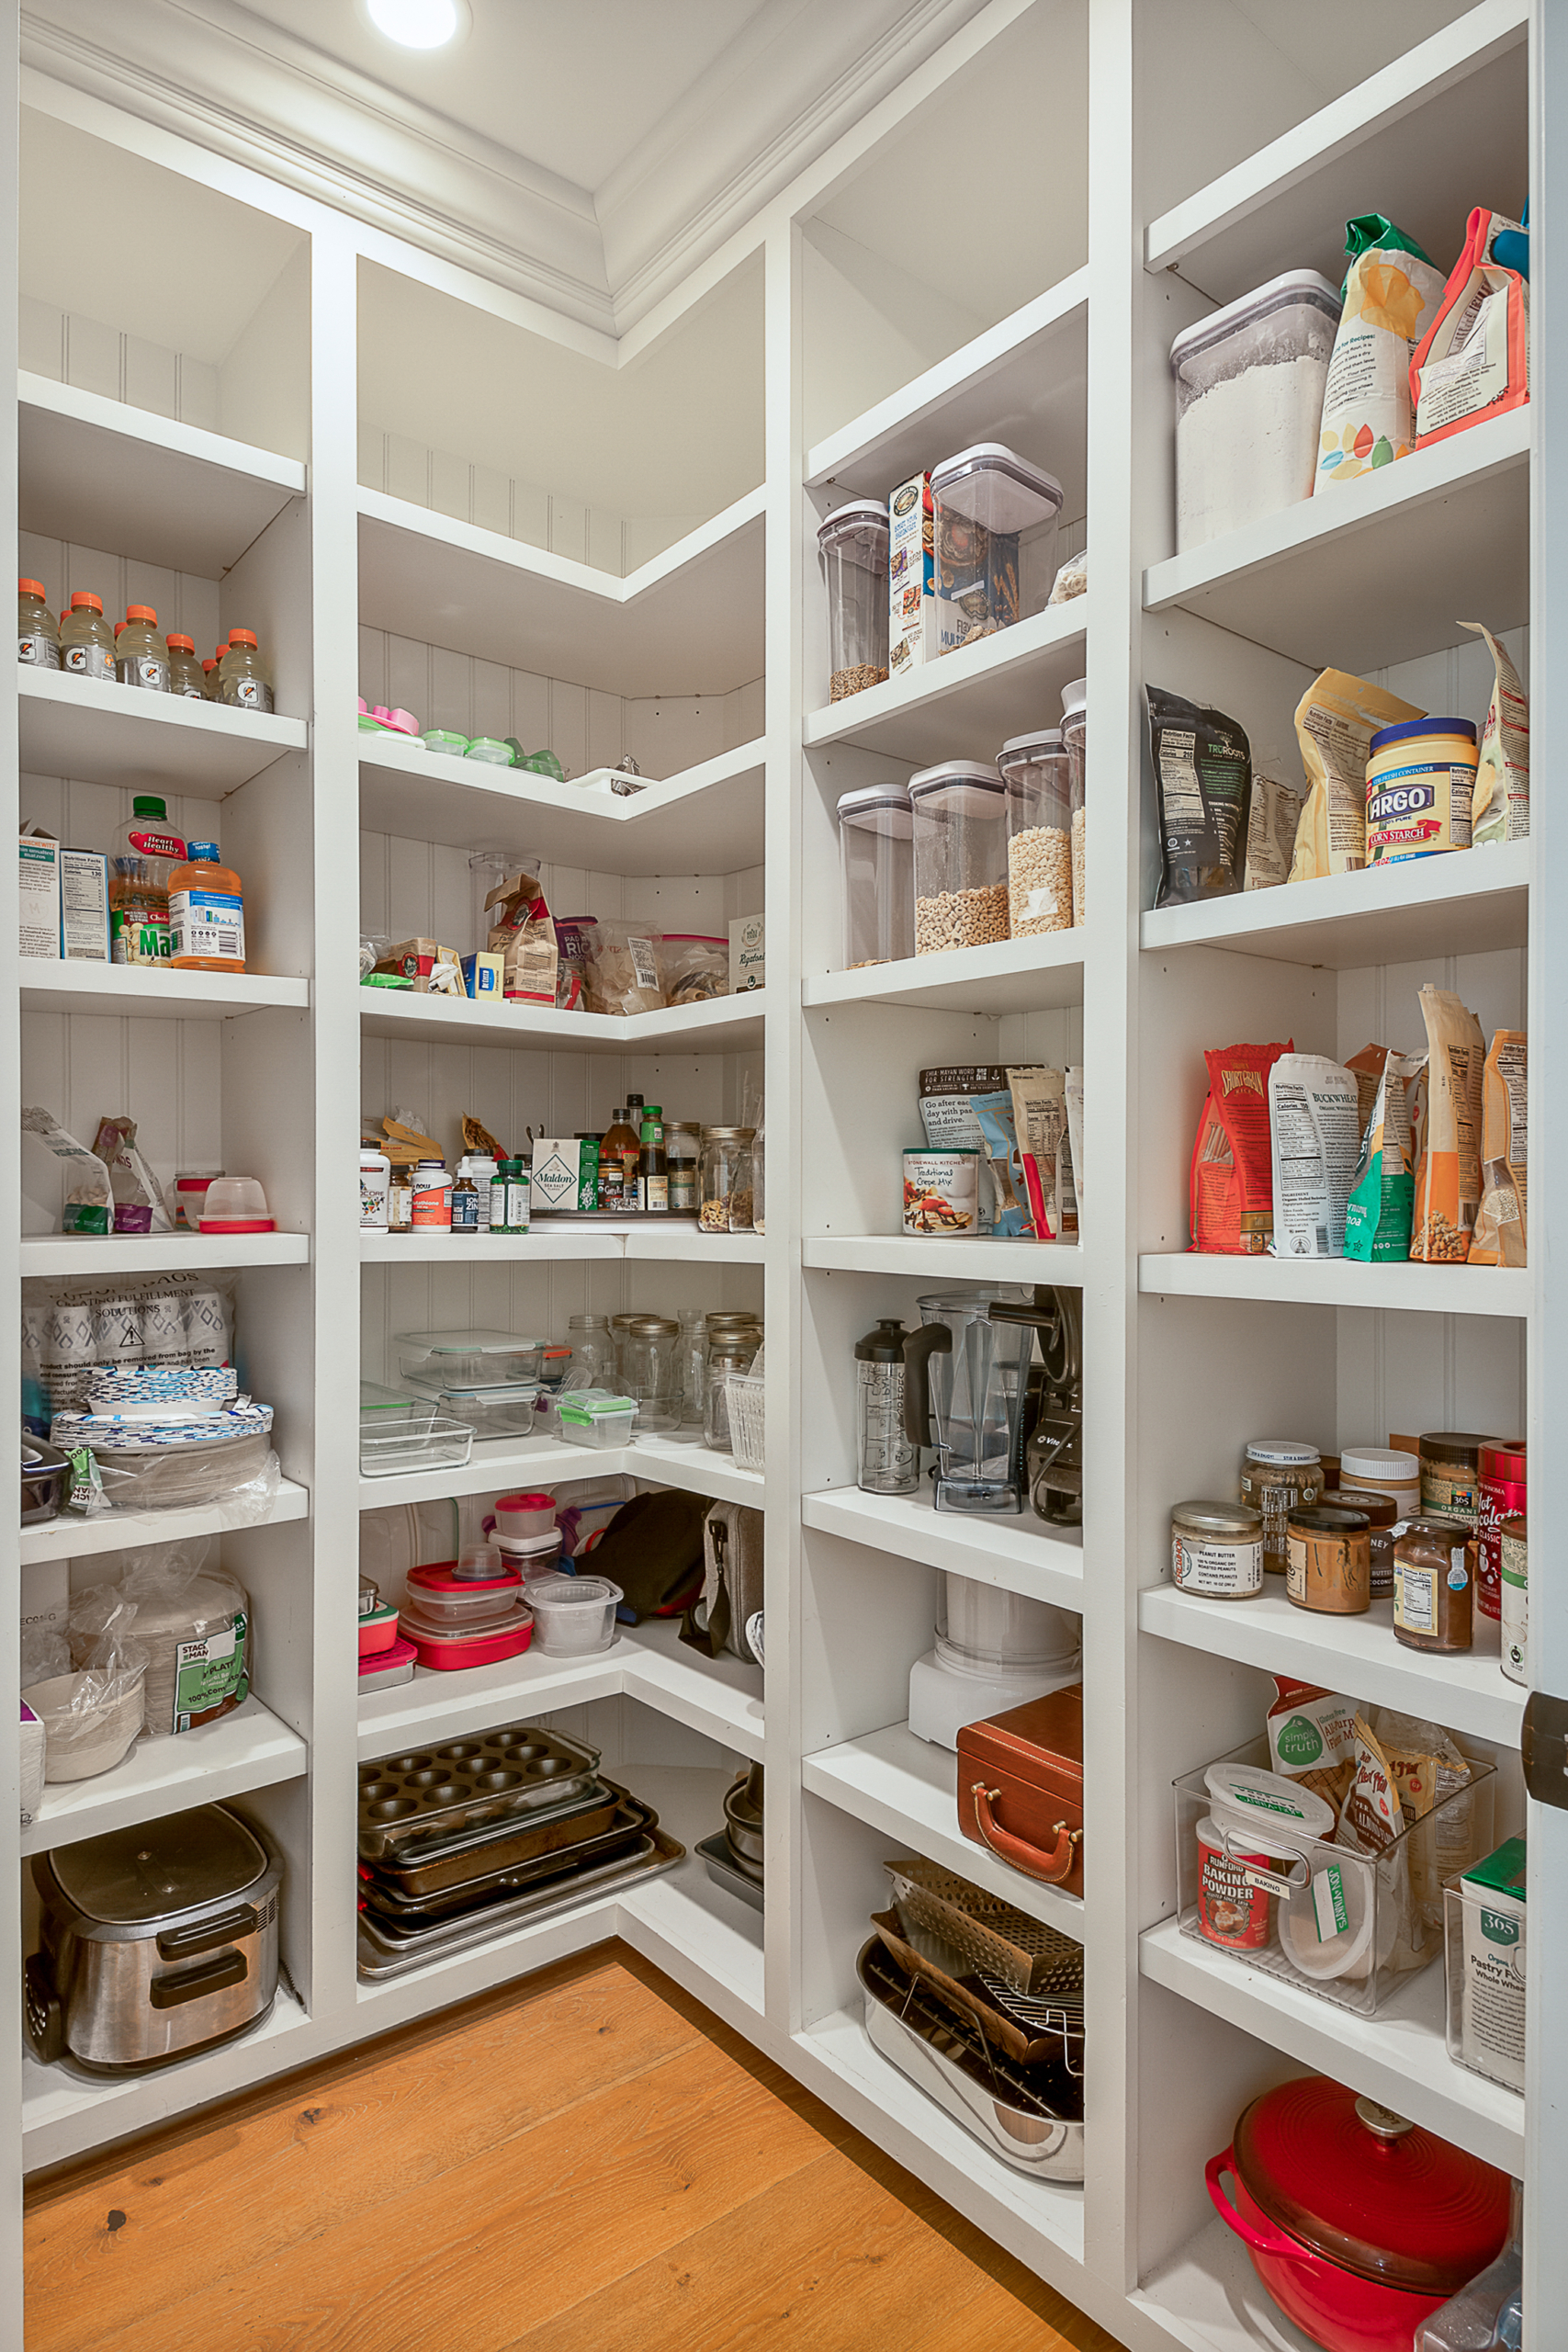 Large pantry with built-in shelves